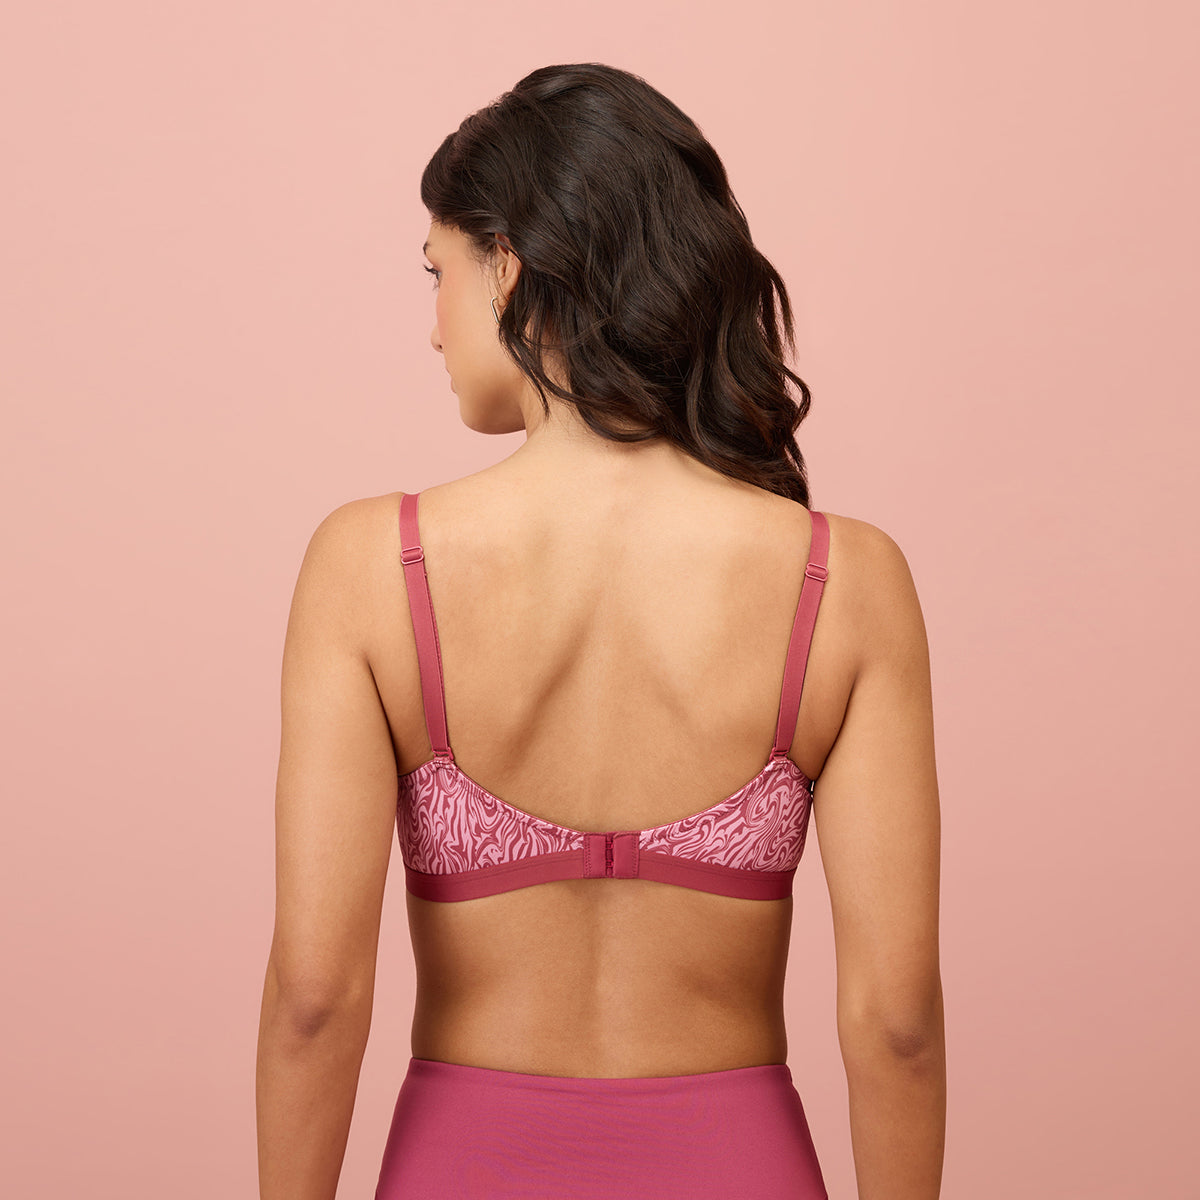 Nykd By Nykaa Printed Padded Wired T-shirt Bra-NYB220 - Marble Mirage - Rose